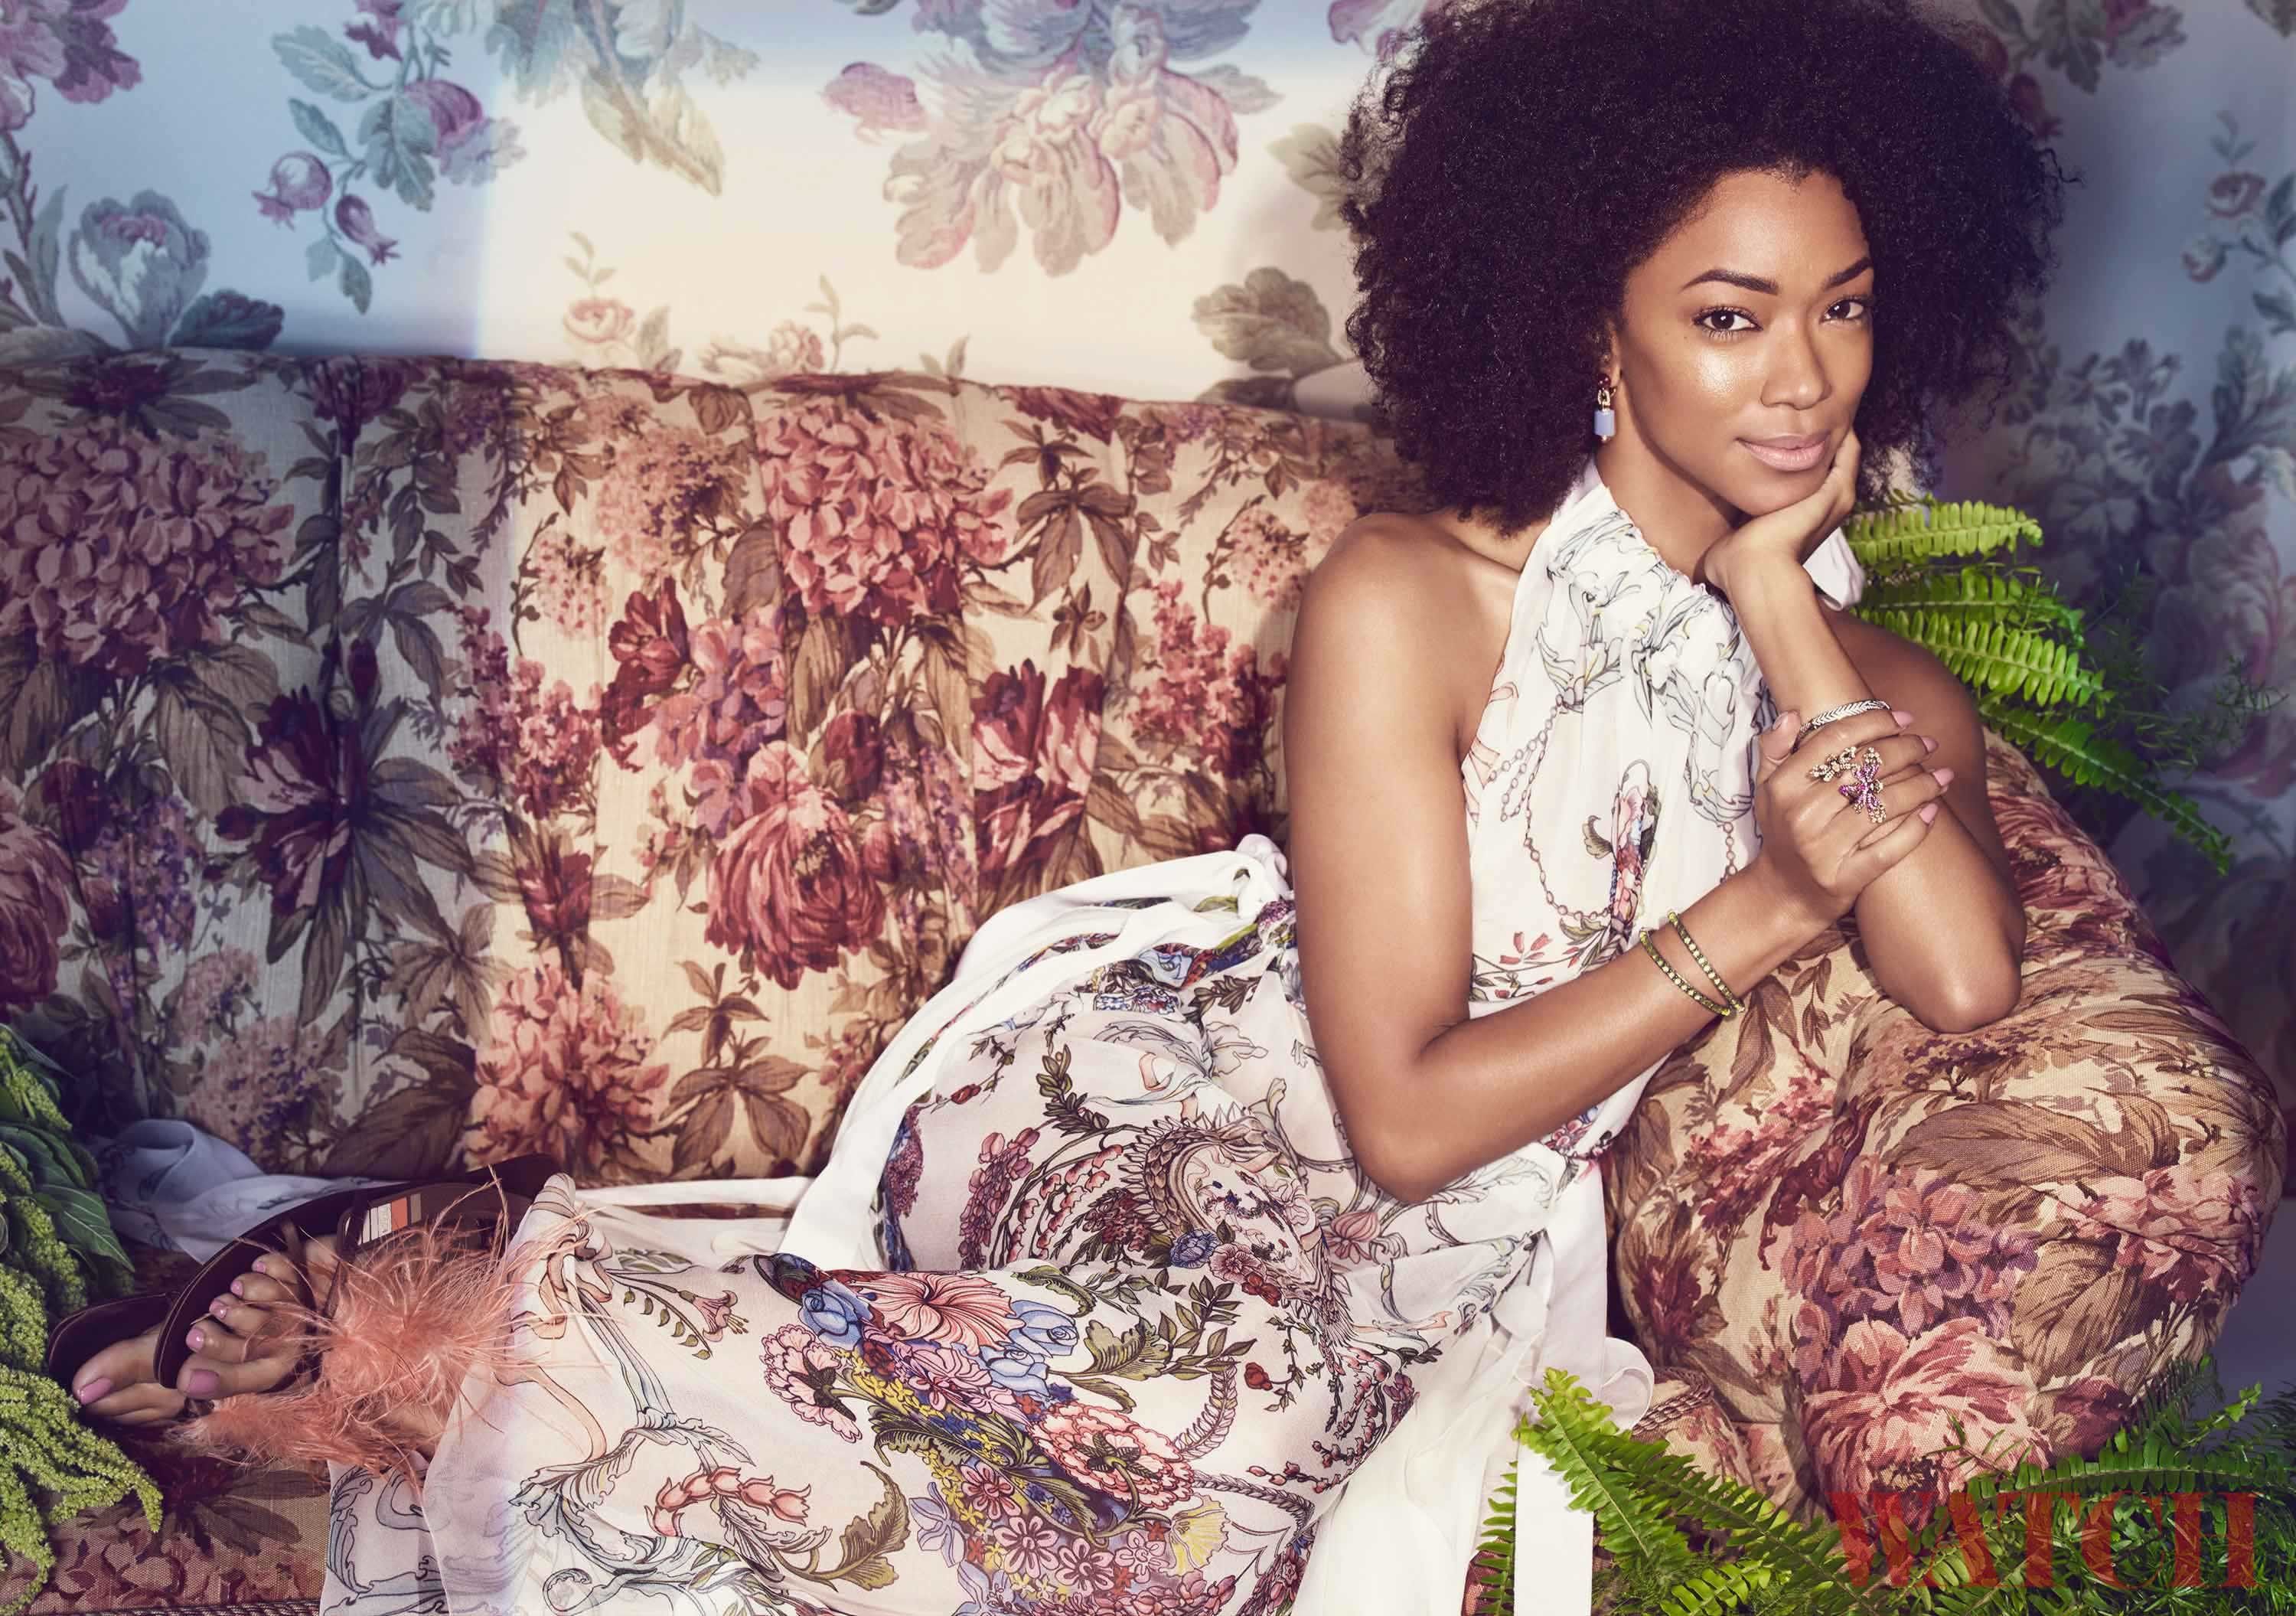 Sonequa Martin-Green reclines a floral print couch in a white patterned dress.